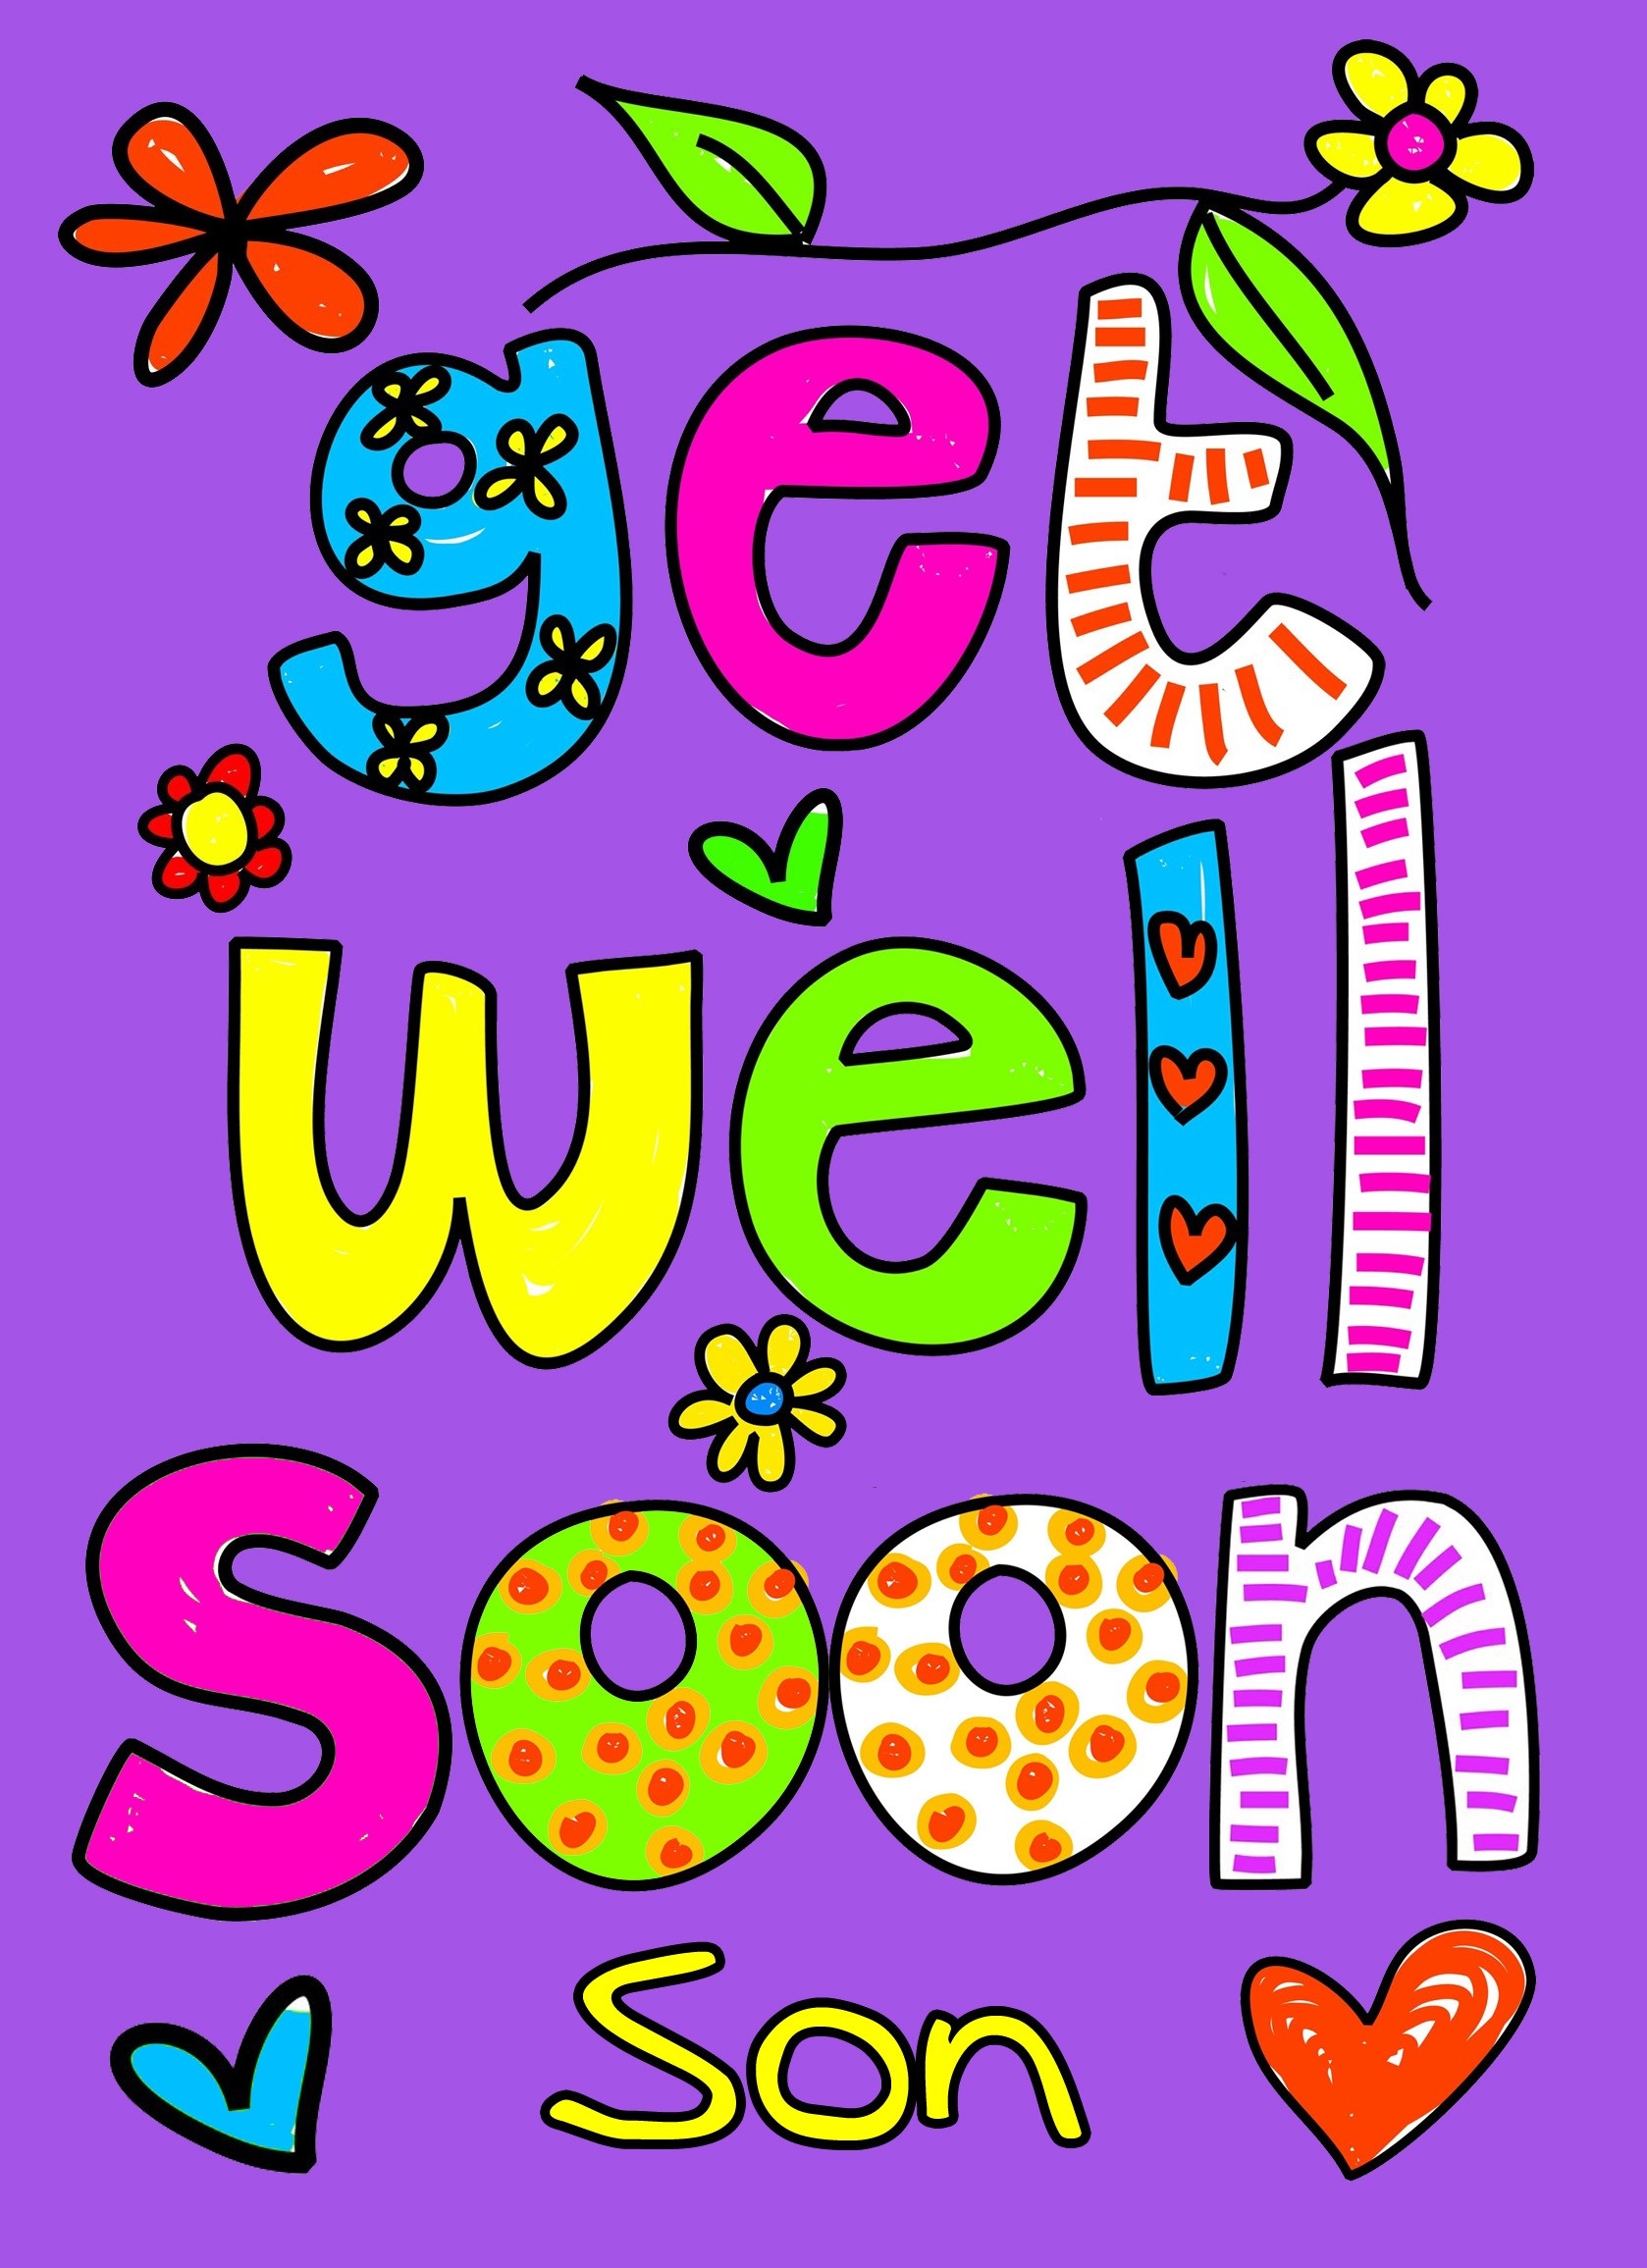 Get Well Soon 'Son' Greeting Card